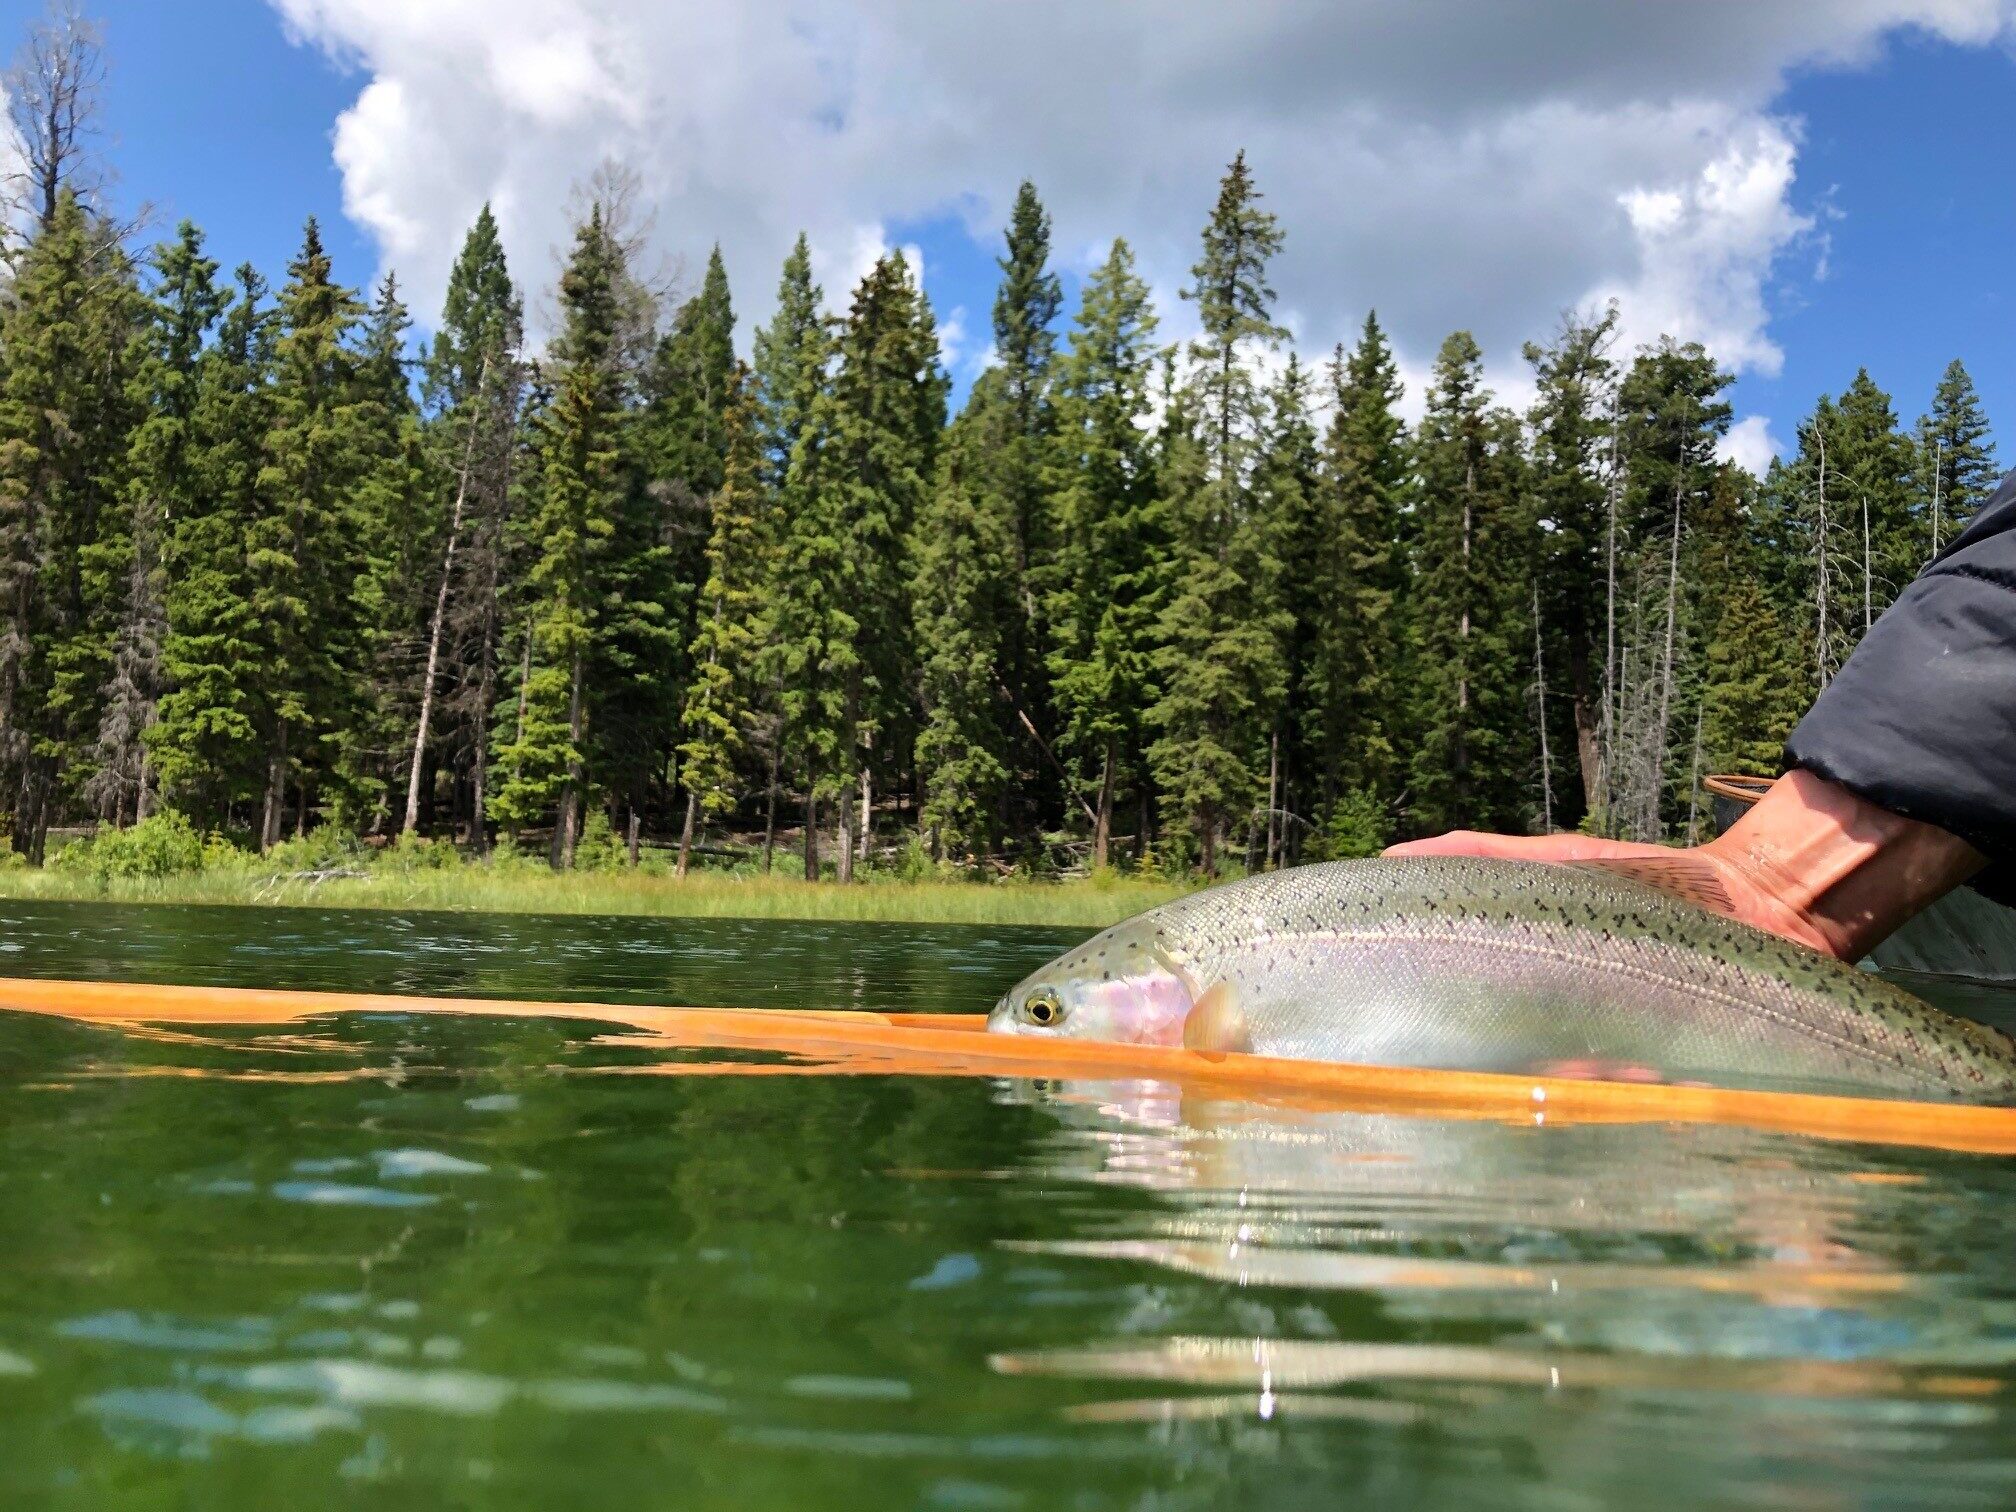 Stillwater Trout Fishing in Hot Summer Conditions: Tips for